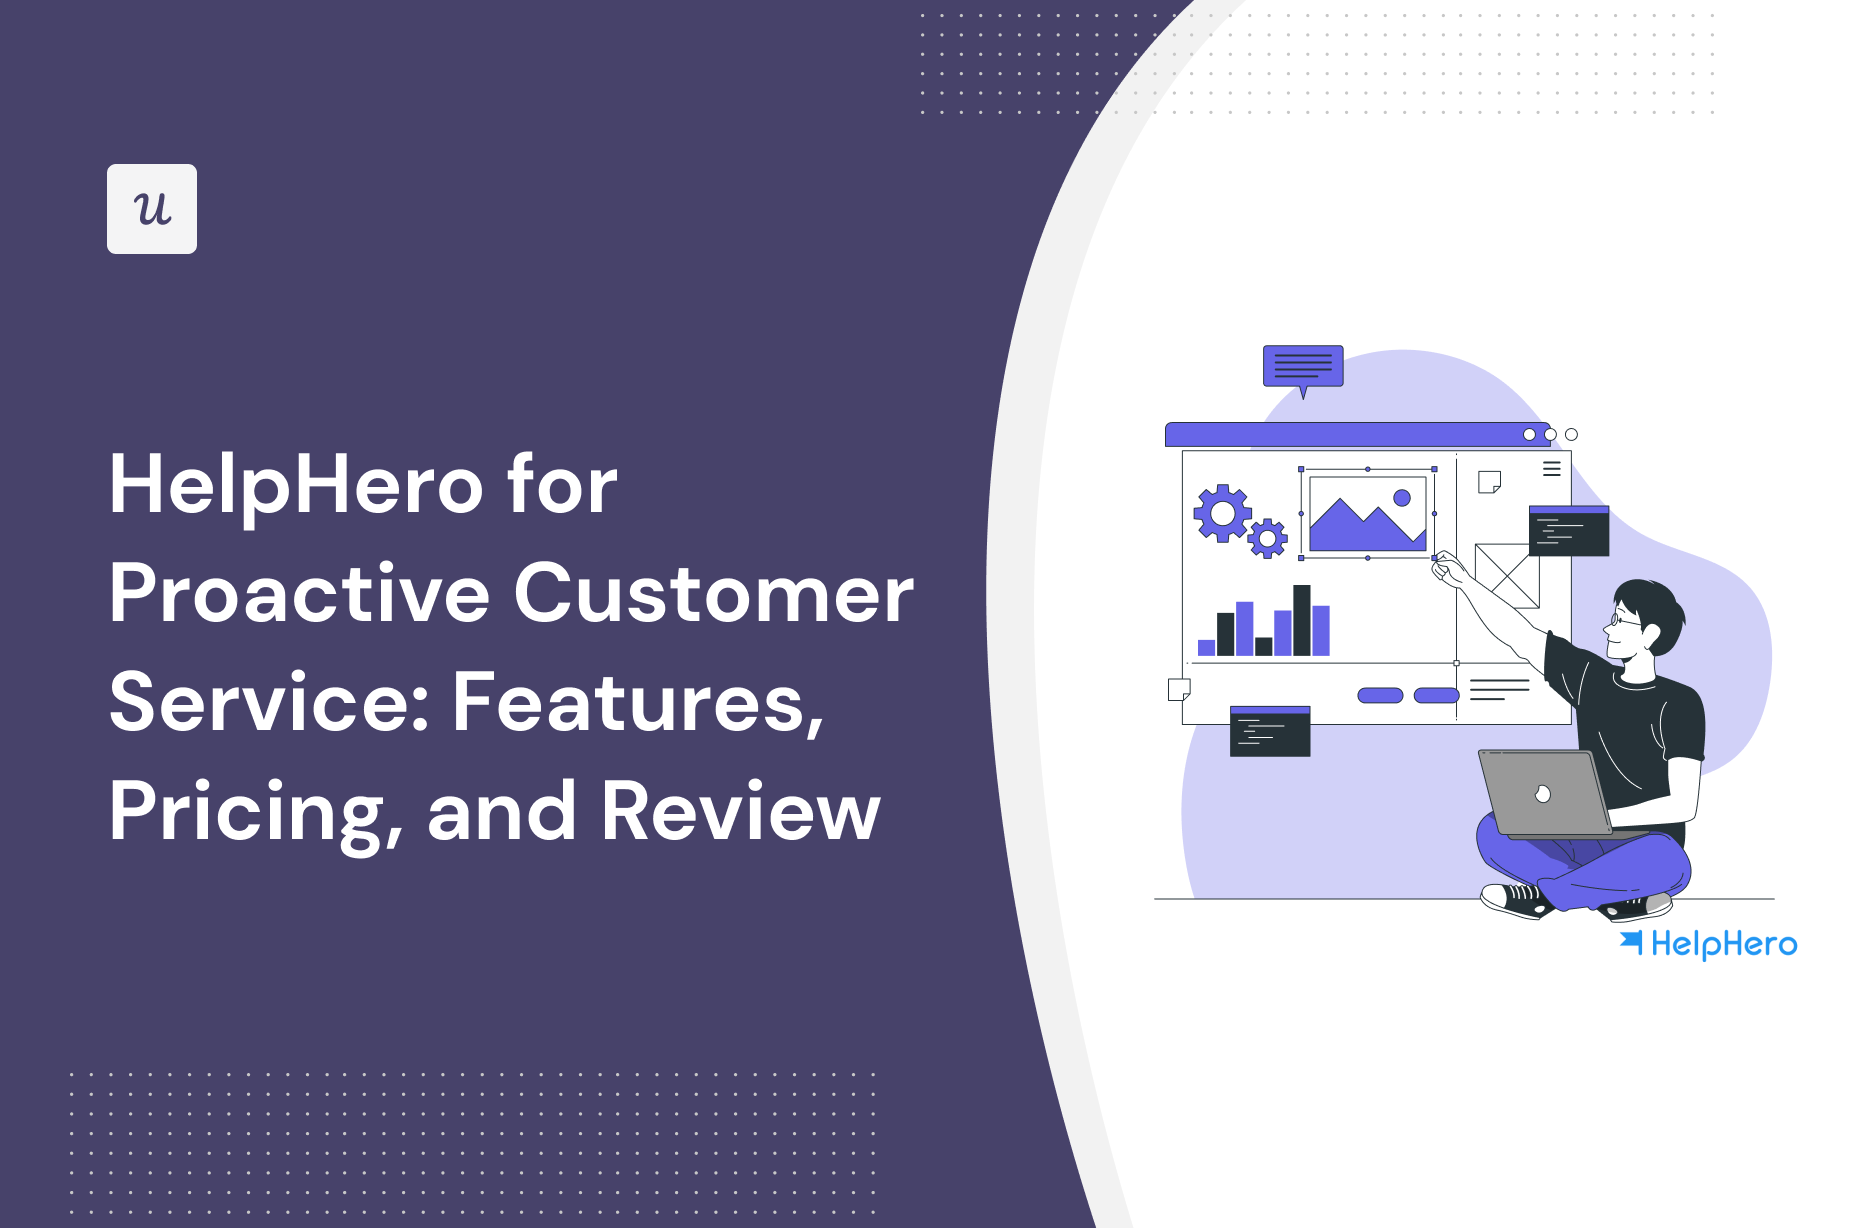 HelpHero for proactive customer service: Features, Pricing, and Review